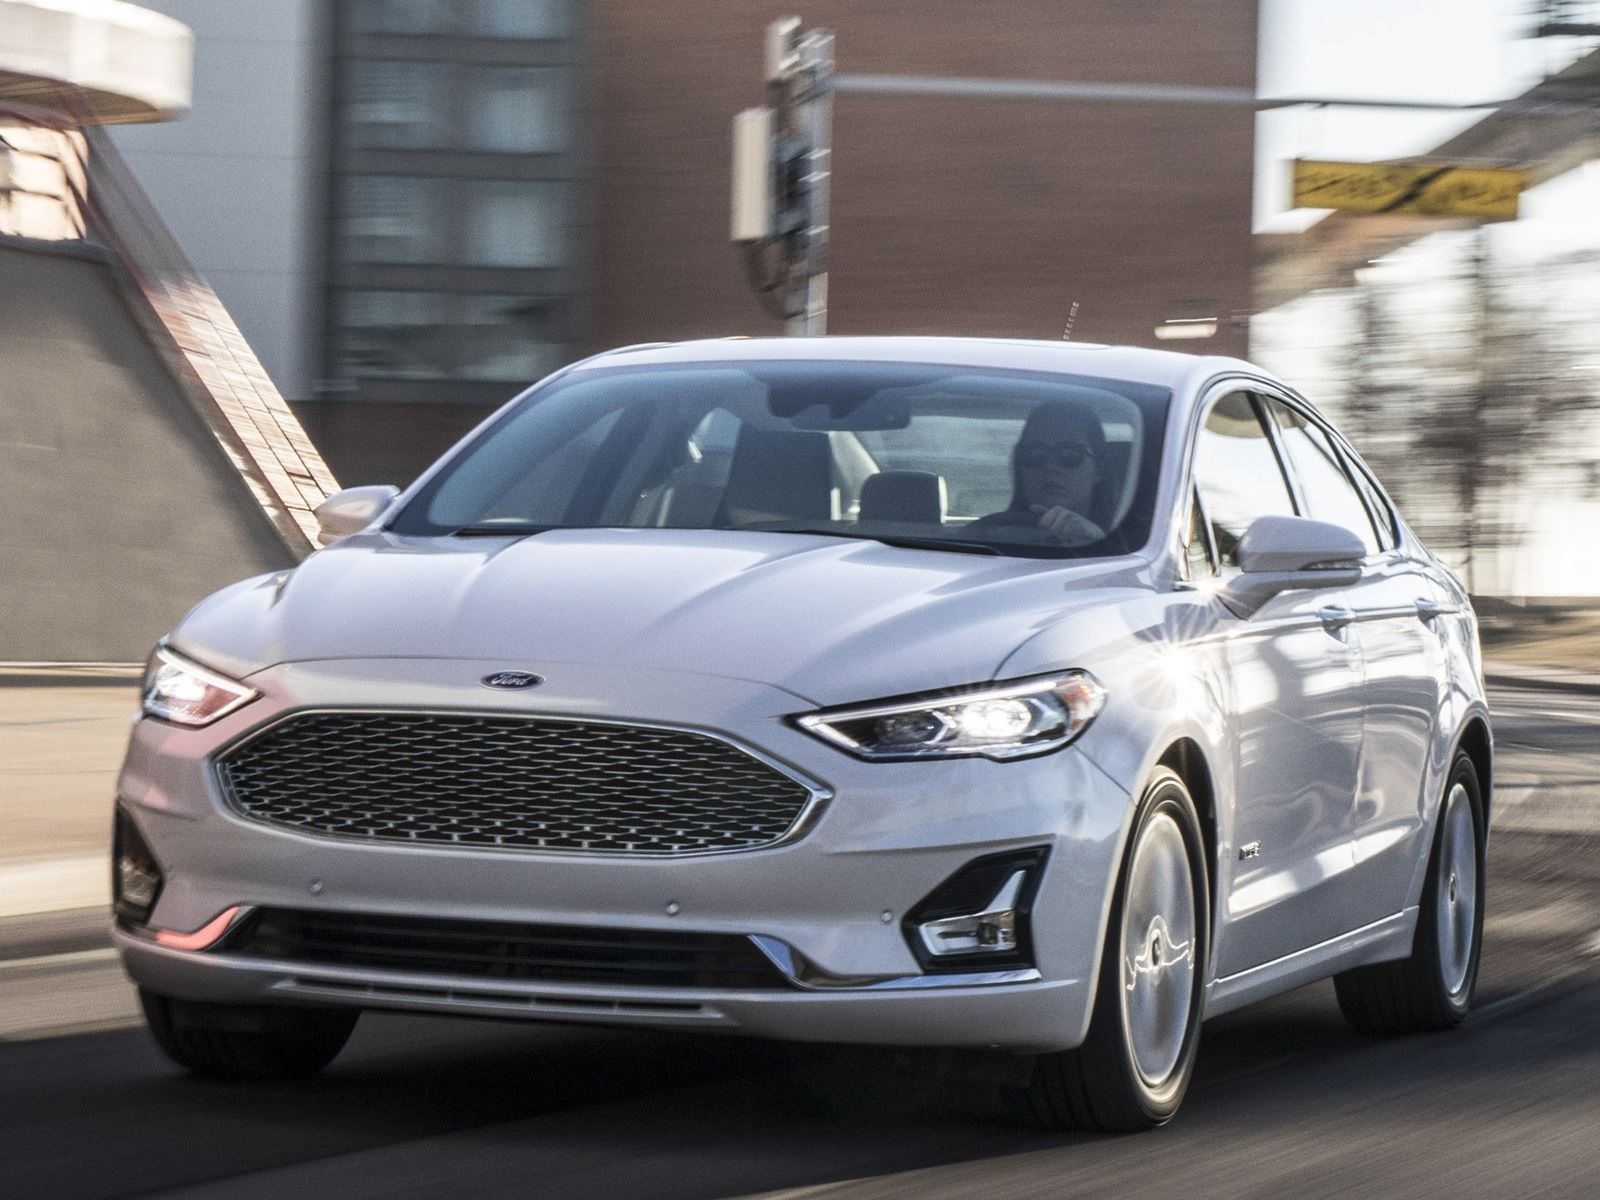 Meet The 2019 Ford Fusion, Now With Standard Co-Pilot360 Technology